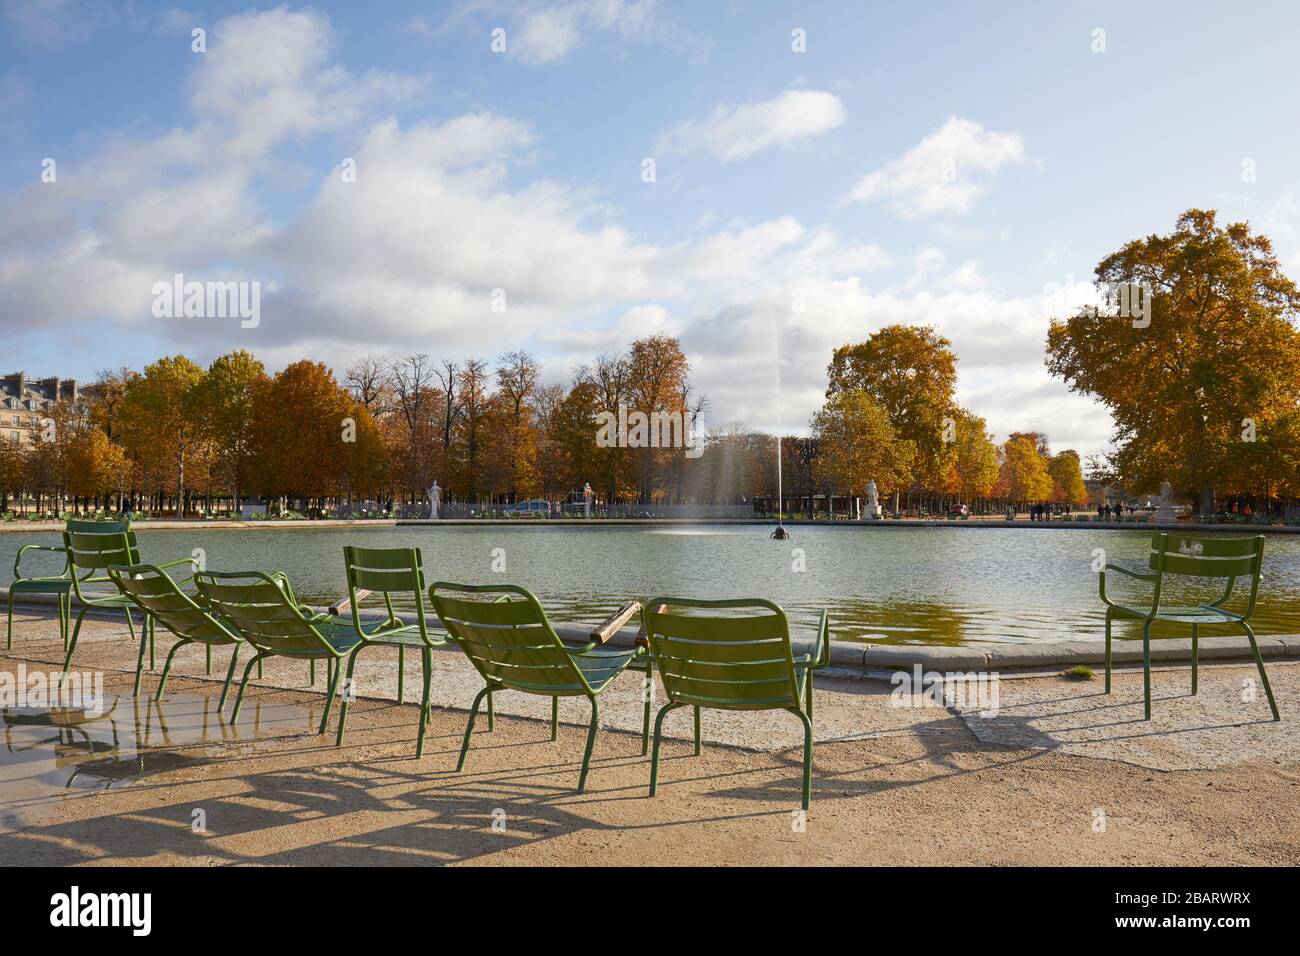 PARIS - NOVEMBER 7, 2019: Tuileries garden with green metal chairs and fountain in a sunny autumn day in Paris Stock Photo